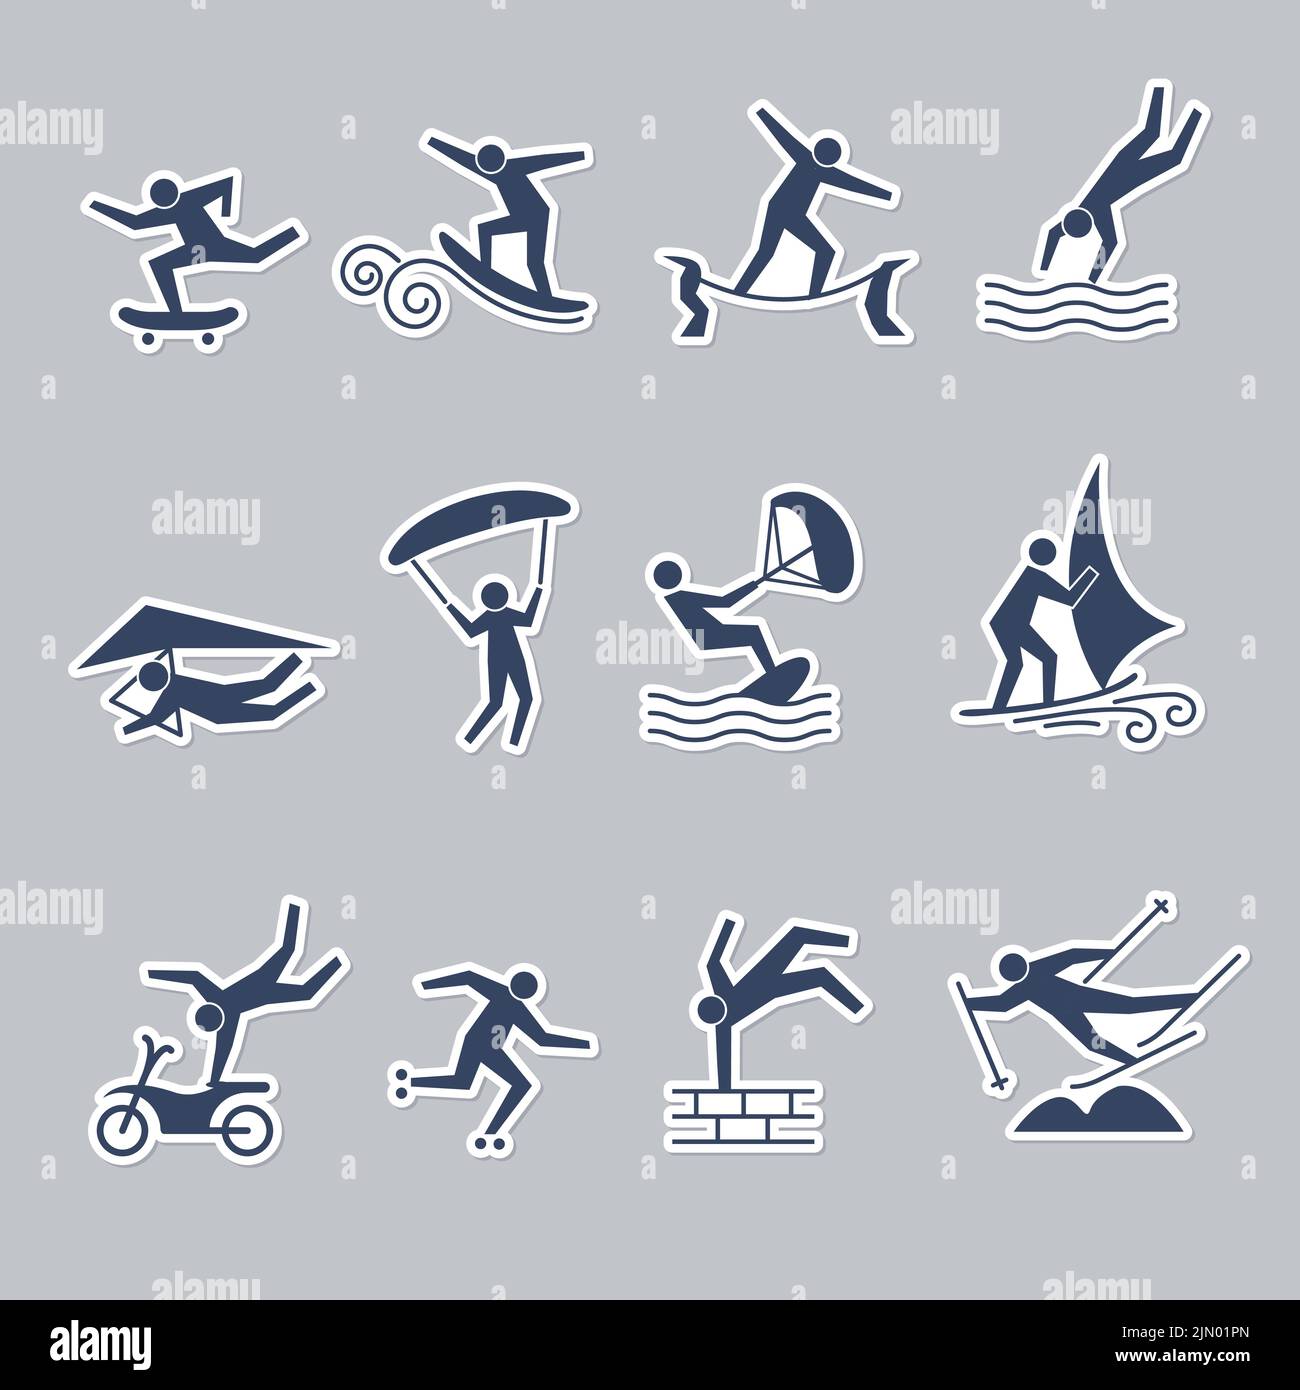 Extreme sport. Fitness icons active lifestyle outdoor people climbing rafting running walking jumping recent vector stylized symbols Stock Vector